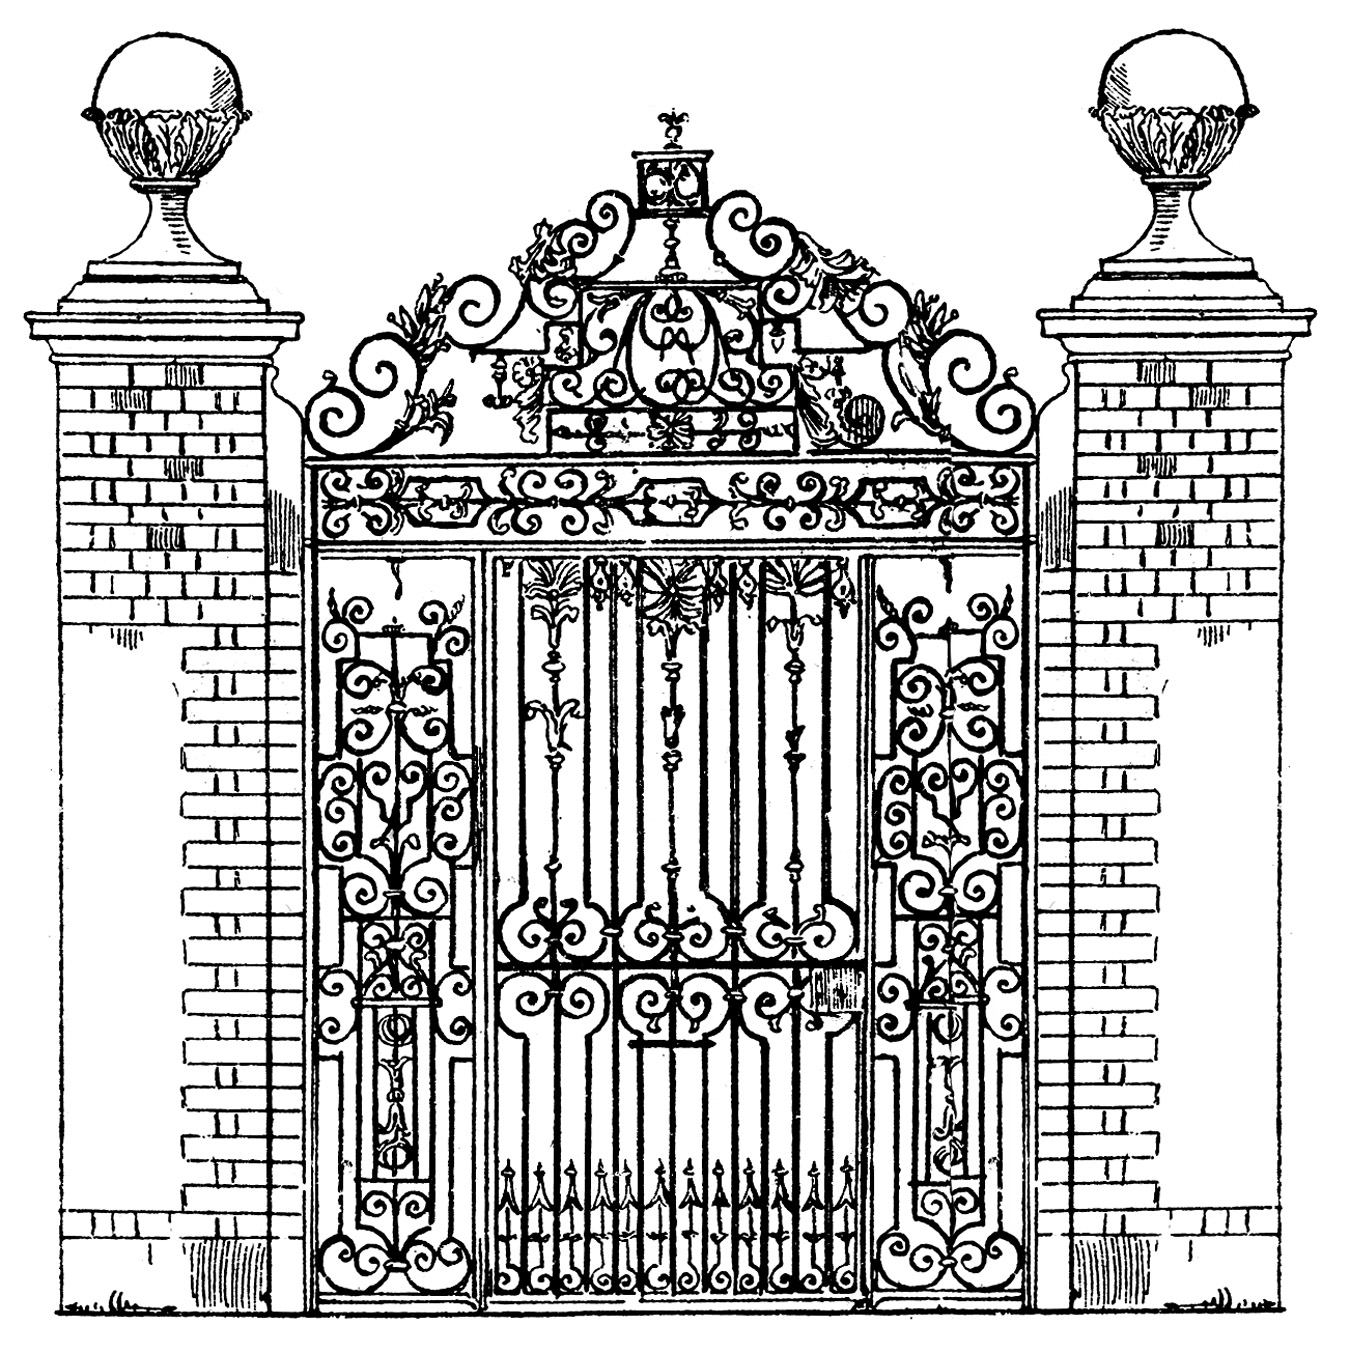 clipart of a gate - photo #20